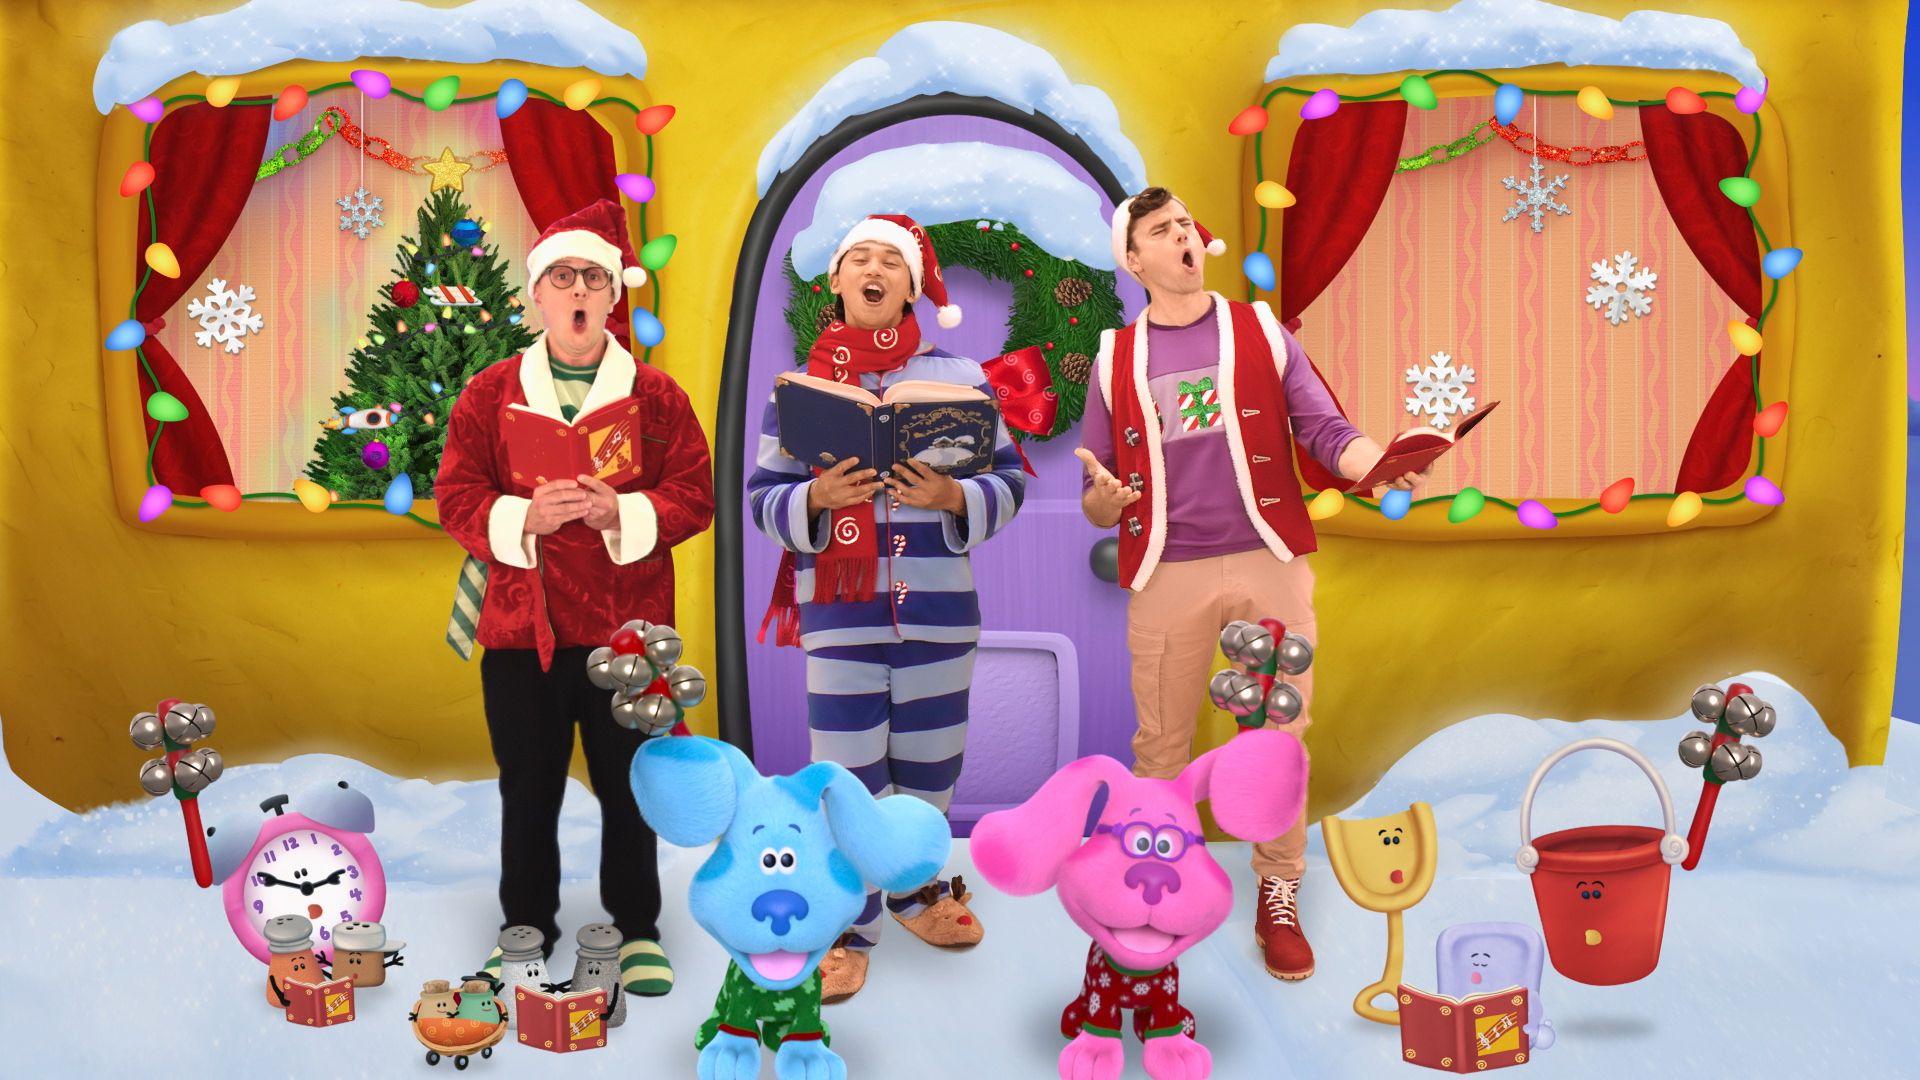 NickALive!: Nickelodeon Celebrates the Festive Season with 'Blue's Clues & You!' Holiday Special; Launches 'Blue's Clues & You! Listen and Play' Alexa Skill